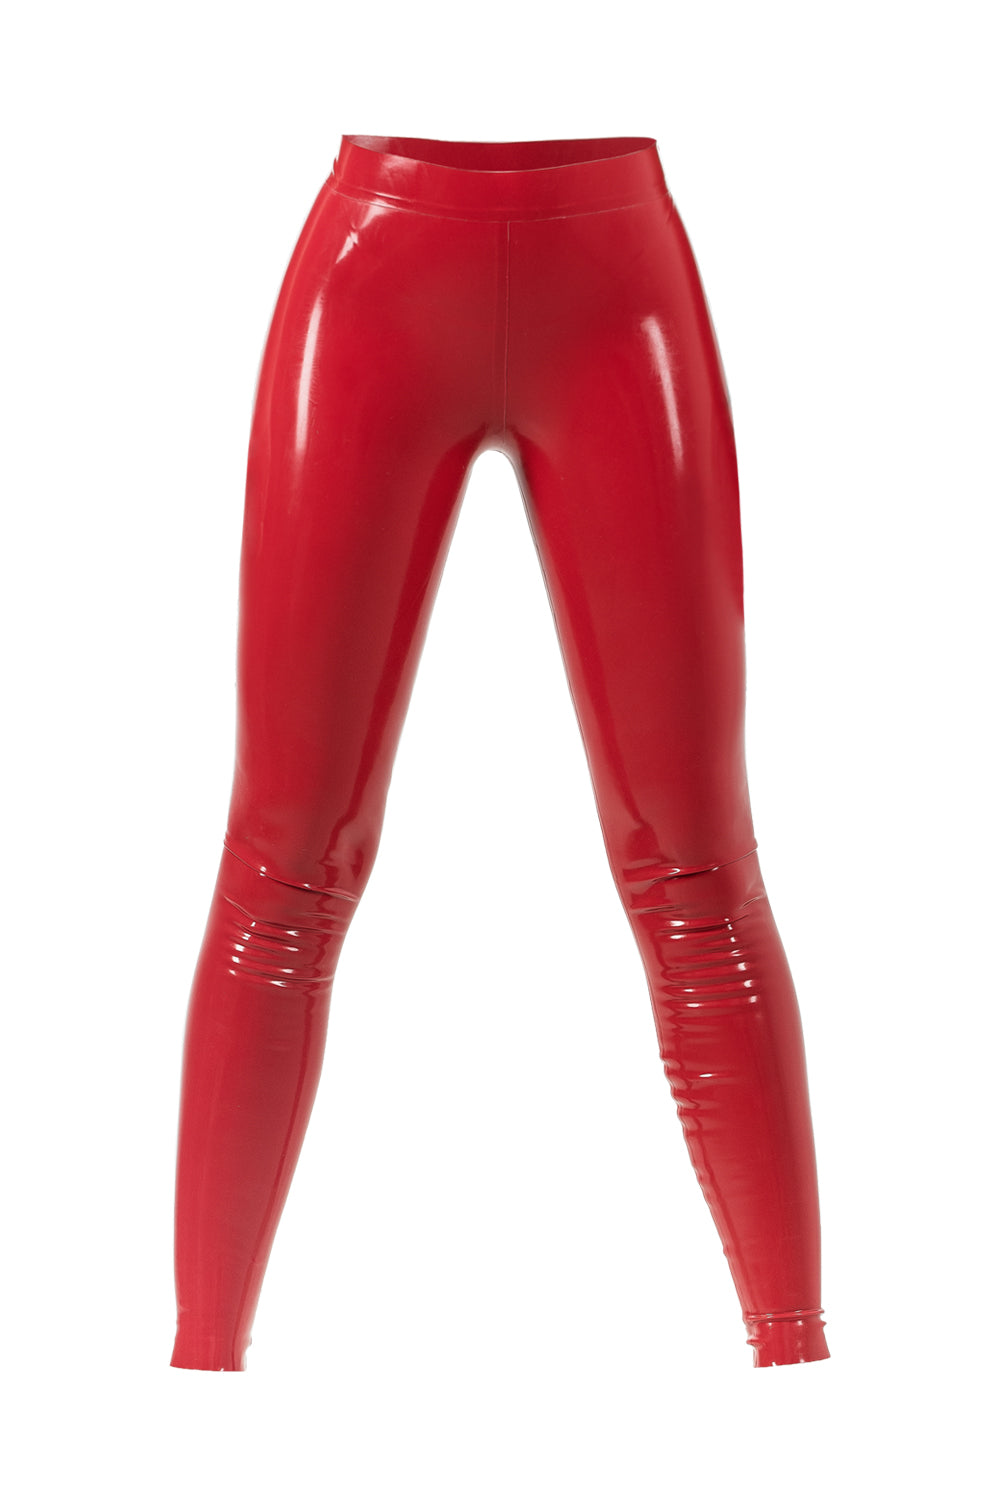 Latex Leggings with Waistband. Turquoise